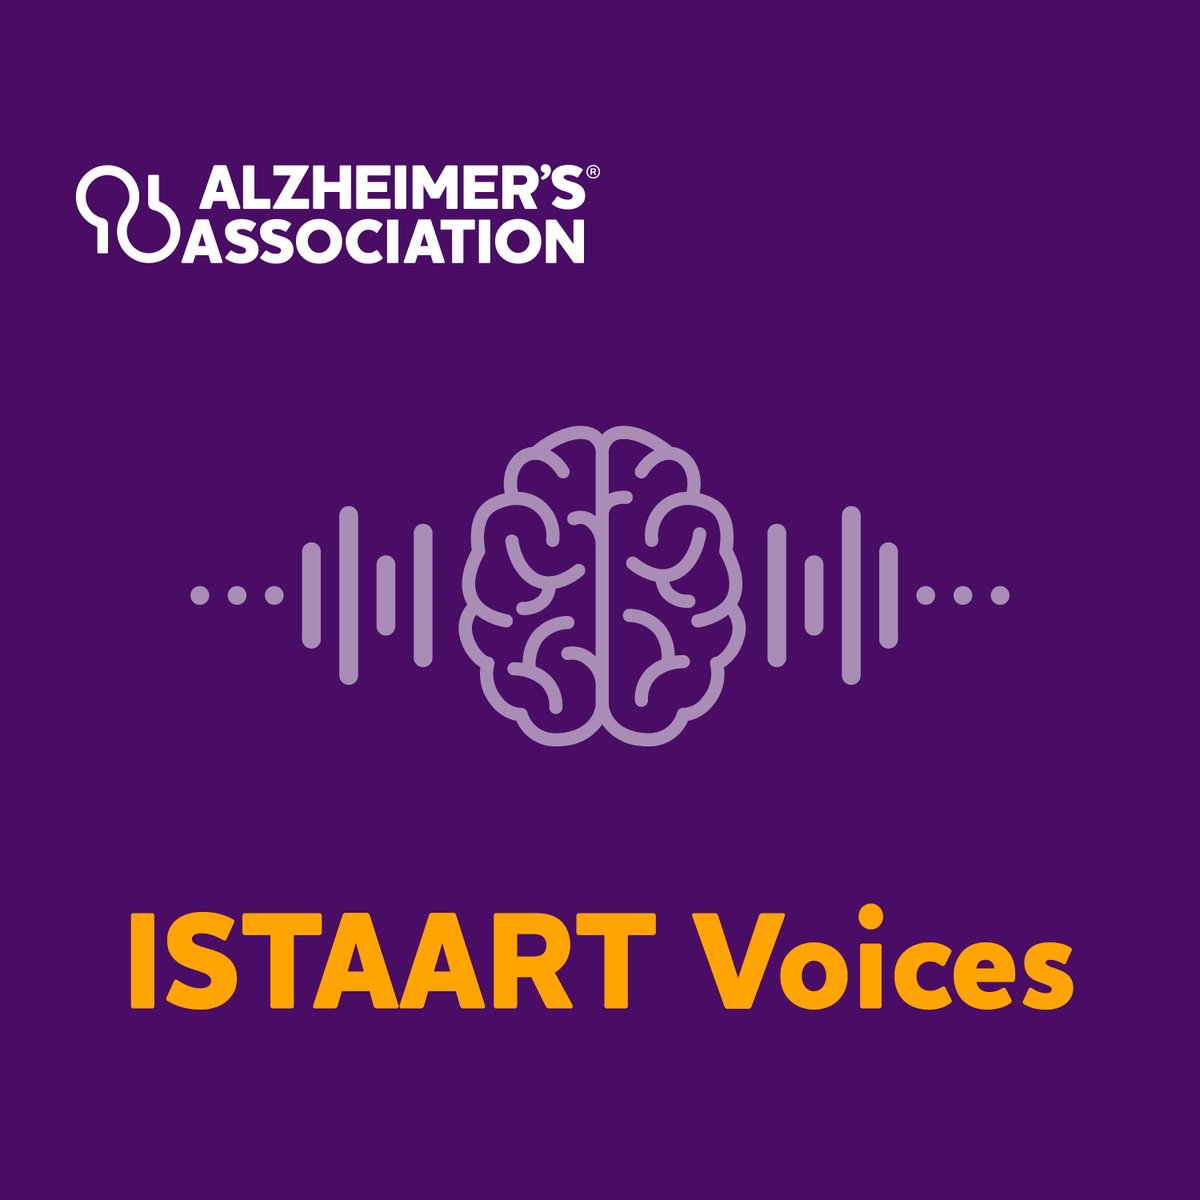 Introducing @ISTAART Voices, a podcast to help you stay up to date with the latest research. Hear from leaders in dementia science who are shaping the field, and dig into recent scientific findings with this new series: alz.org/ISTAARTpodcast